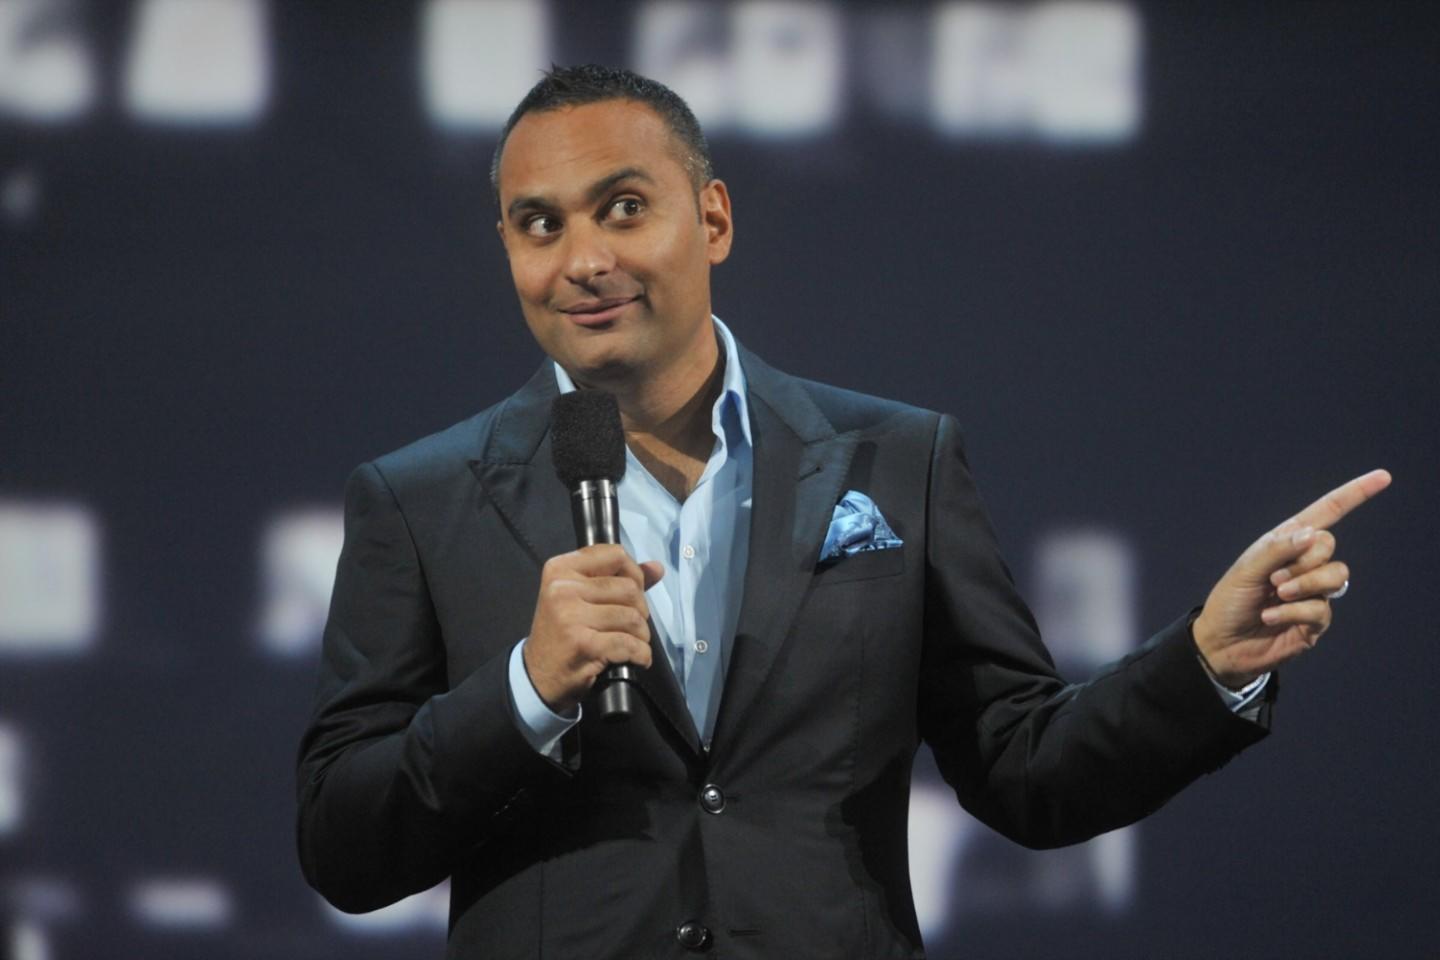 russell peters tour 2023 uk